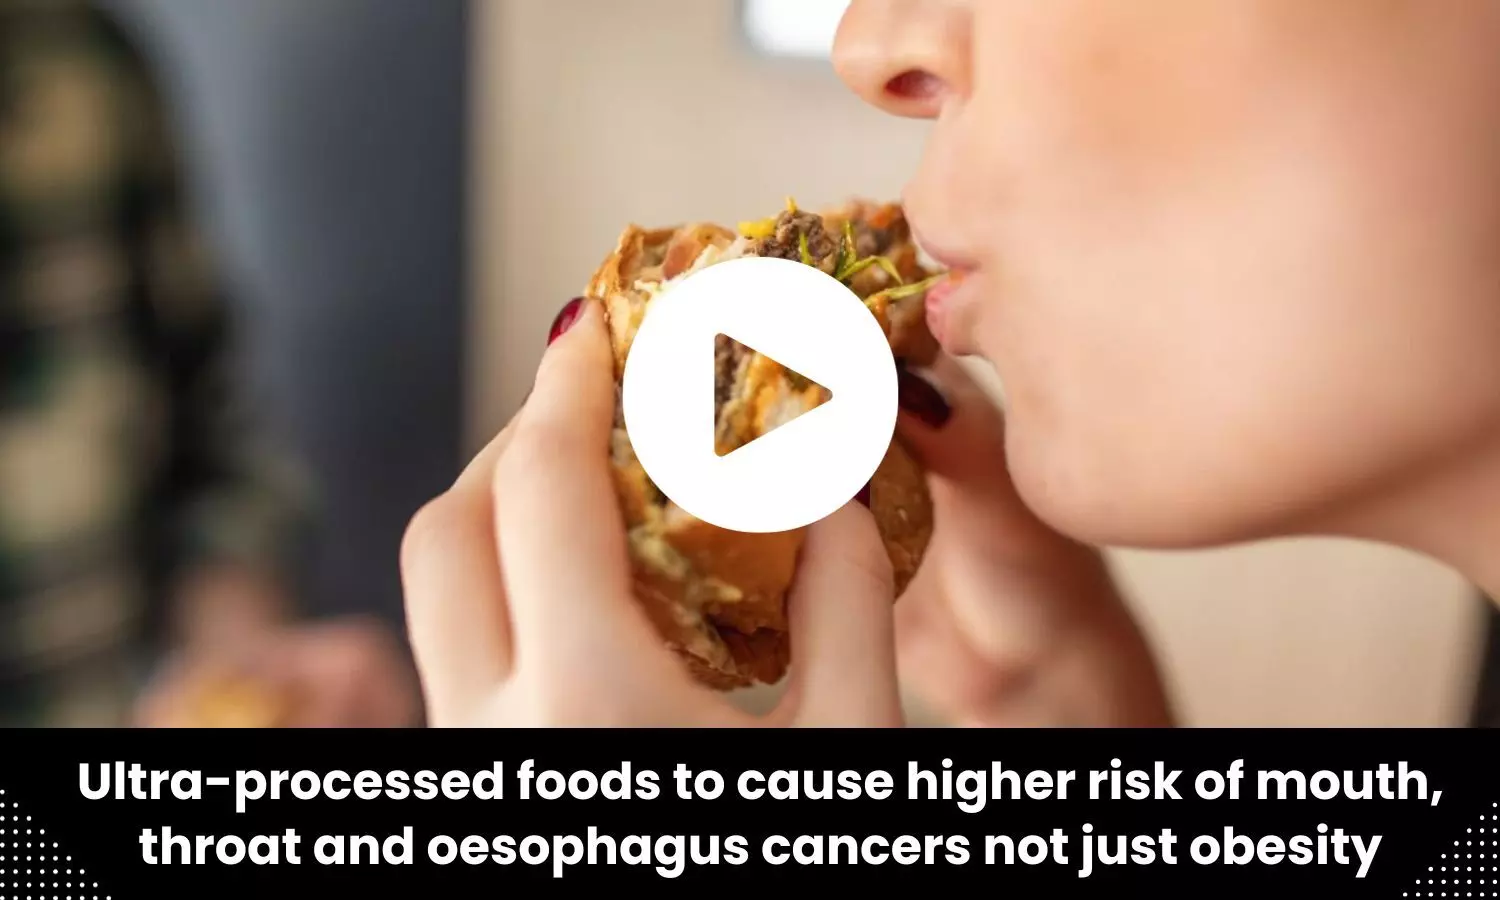 Ultra-processed foods to cause higher risk of mouth, throat and oesophagus cancers not just obesity